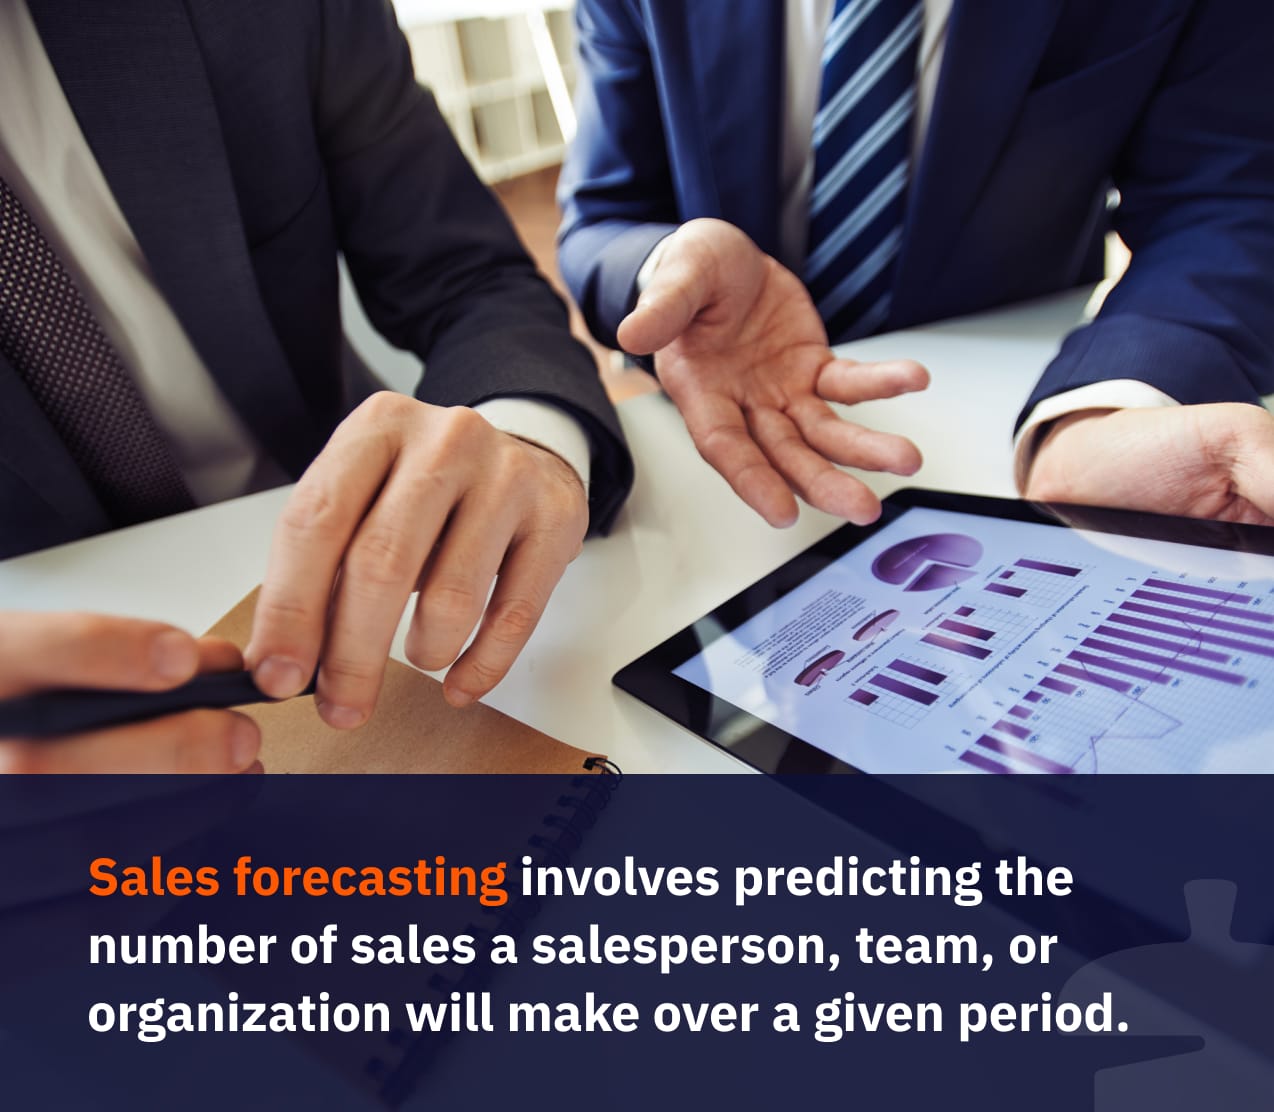 Sales forecasting involves predicting the number of sales a salesperson, team, or organization will make over a given period